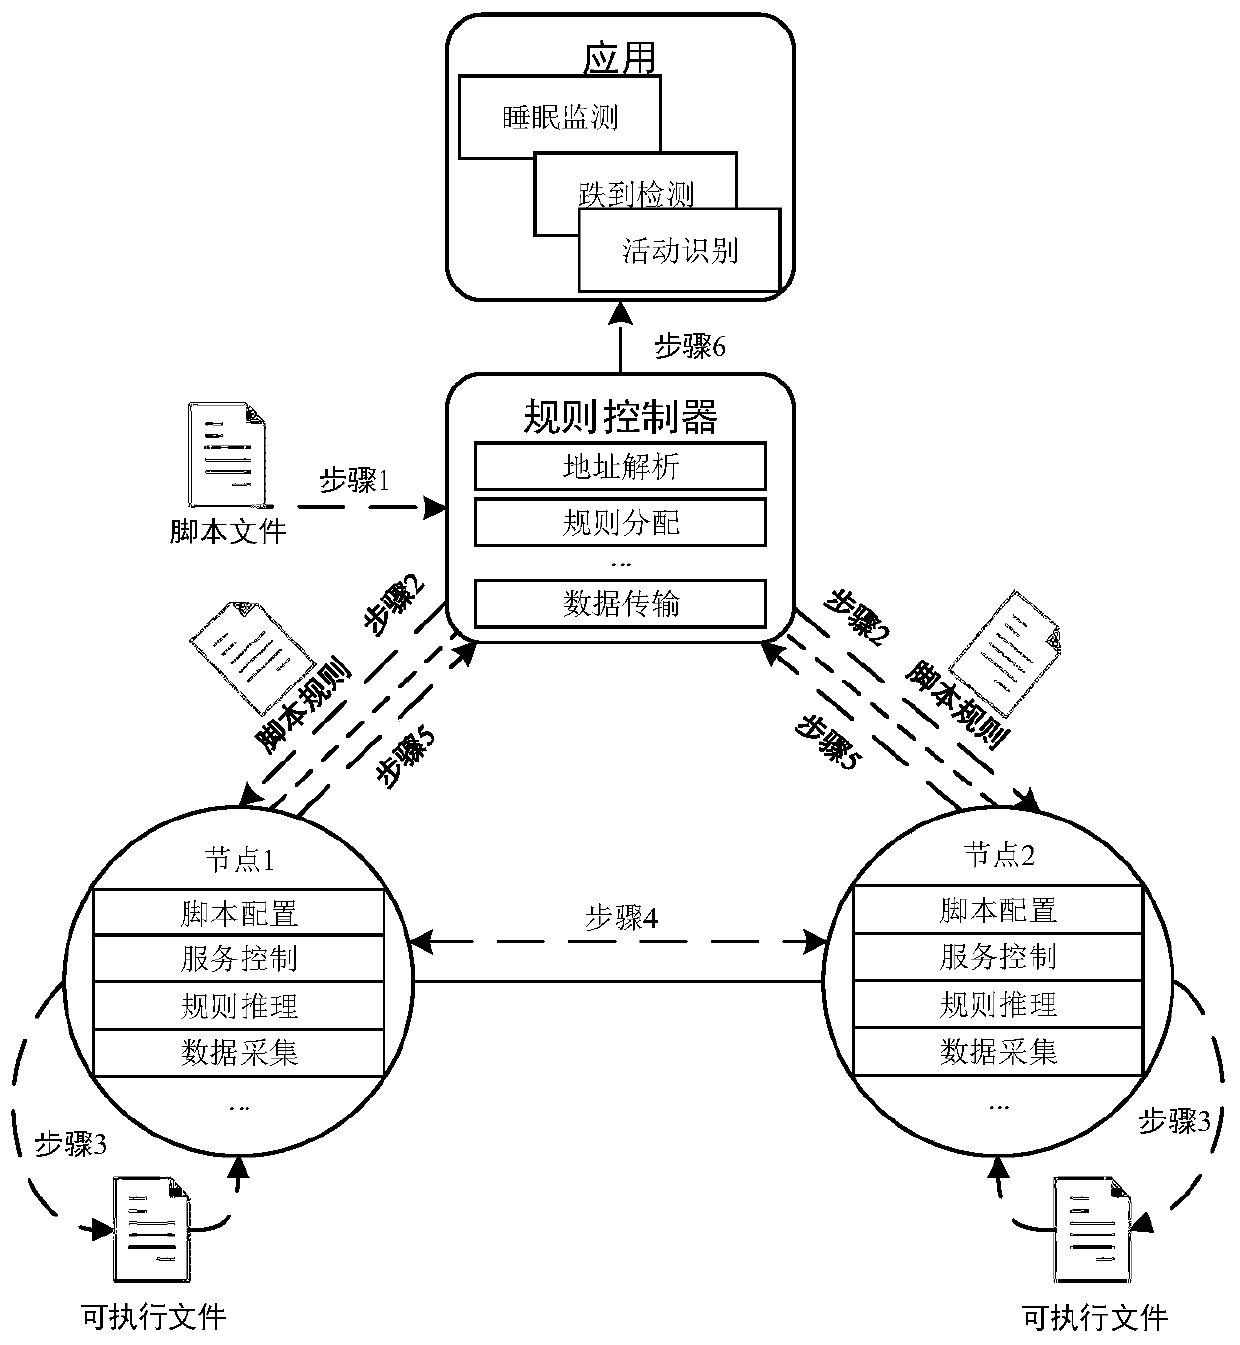 Software-defined intelligent architecture system and method for supporting rapid implementation of intelligent environment